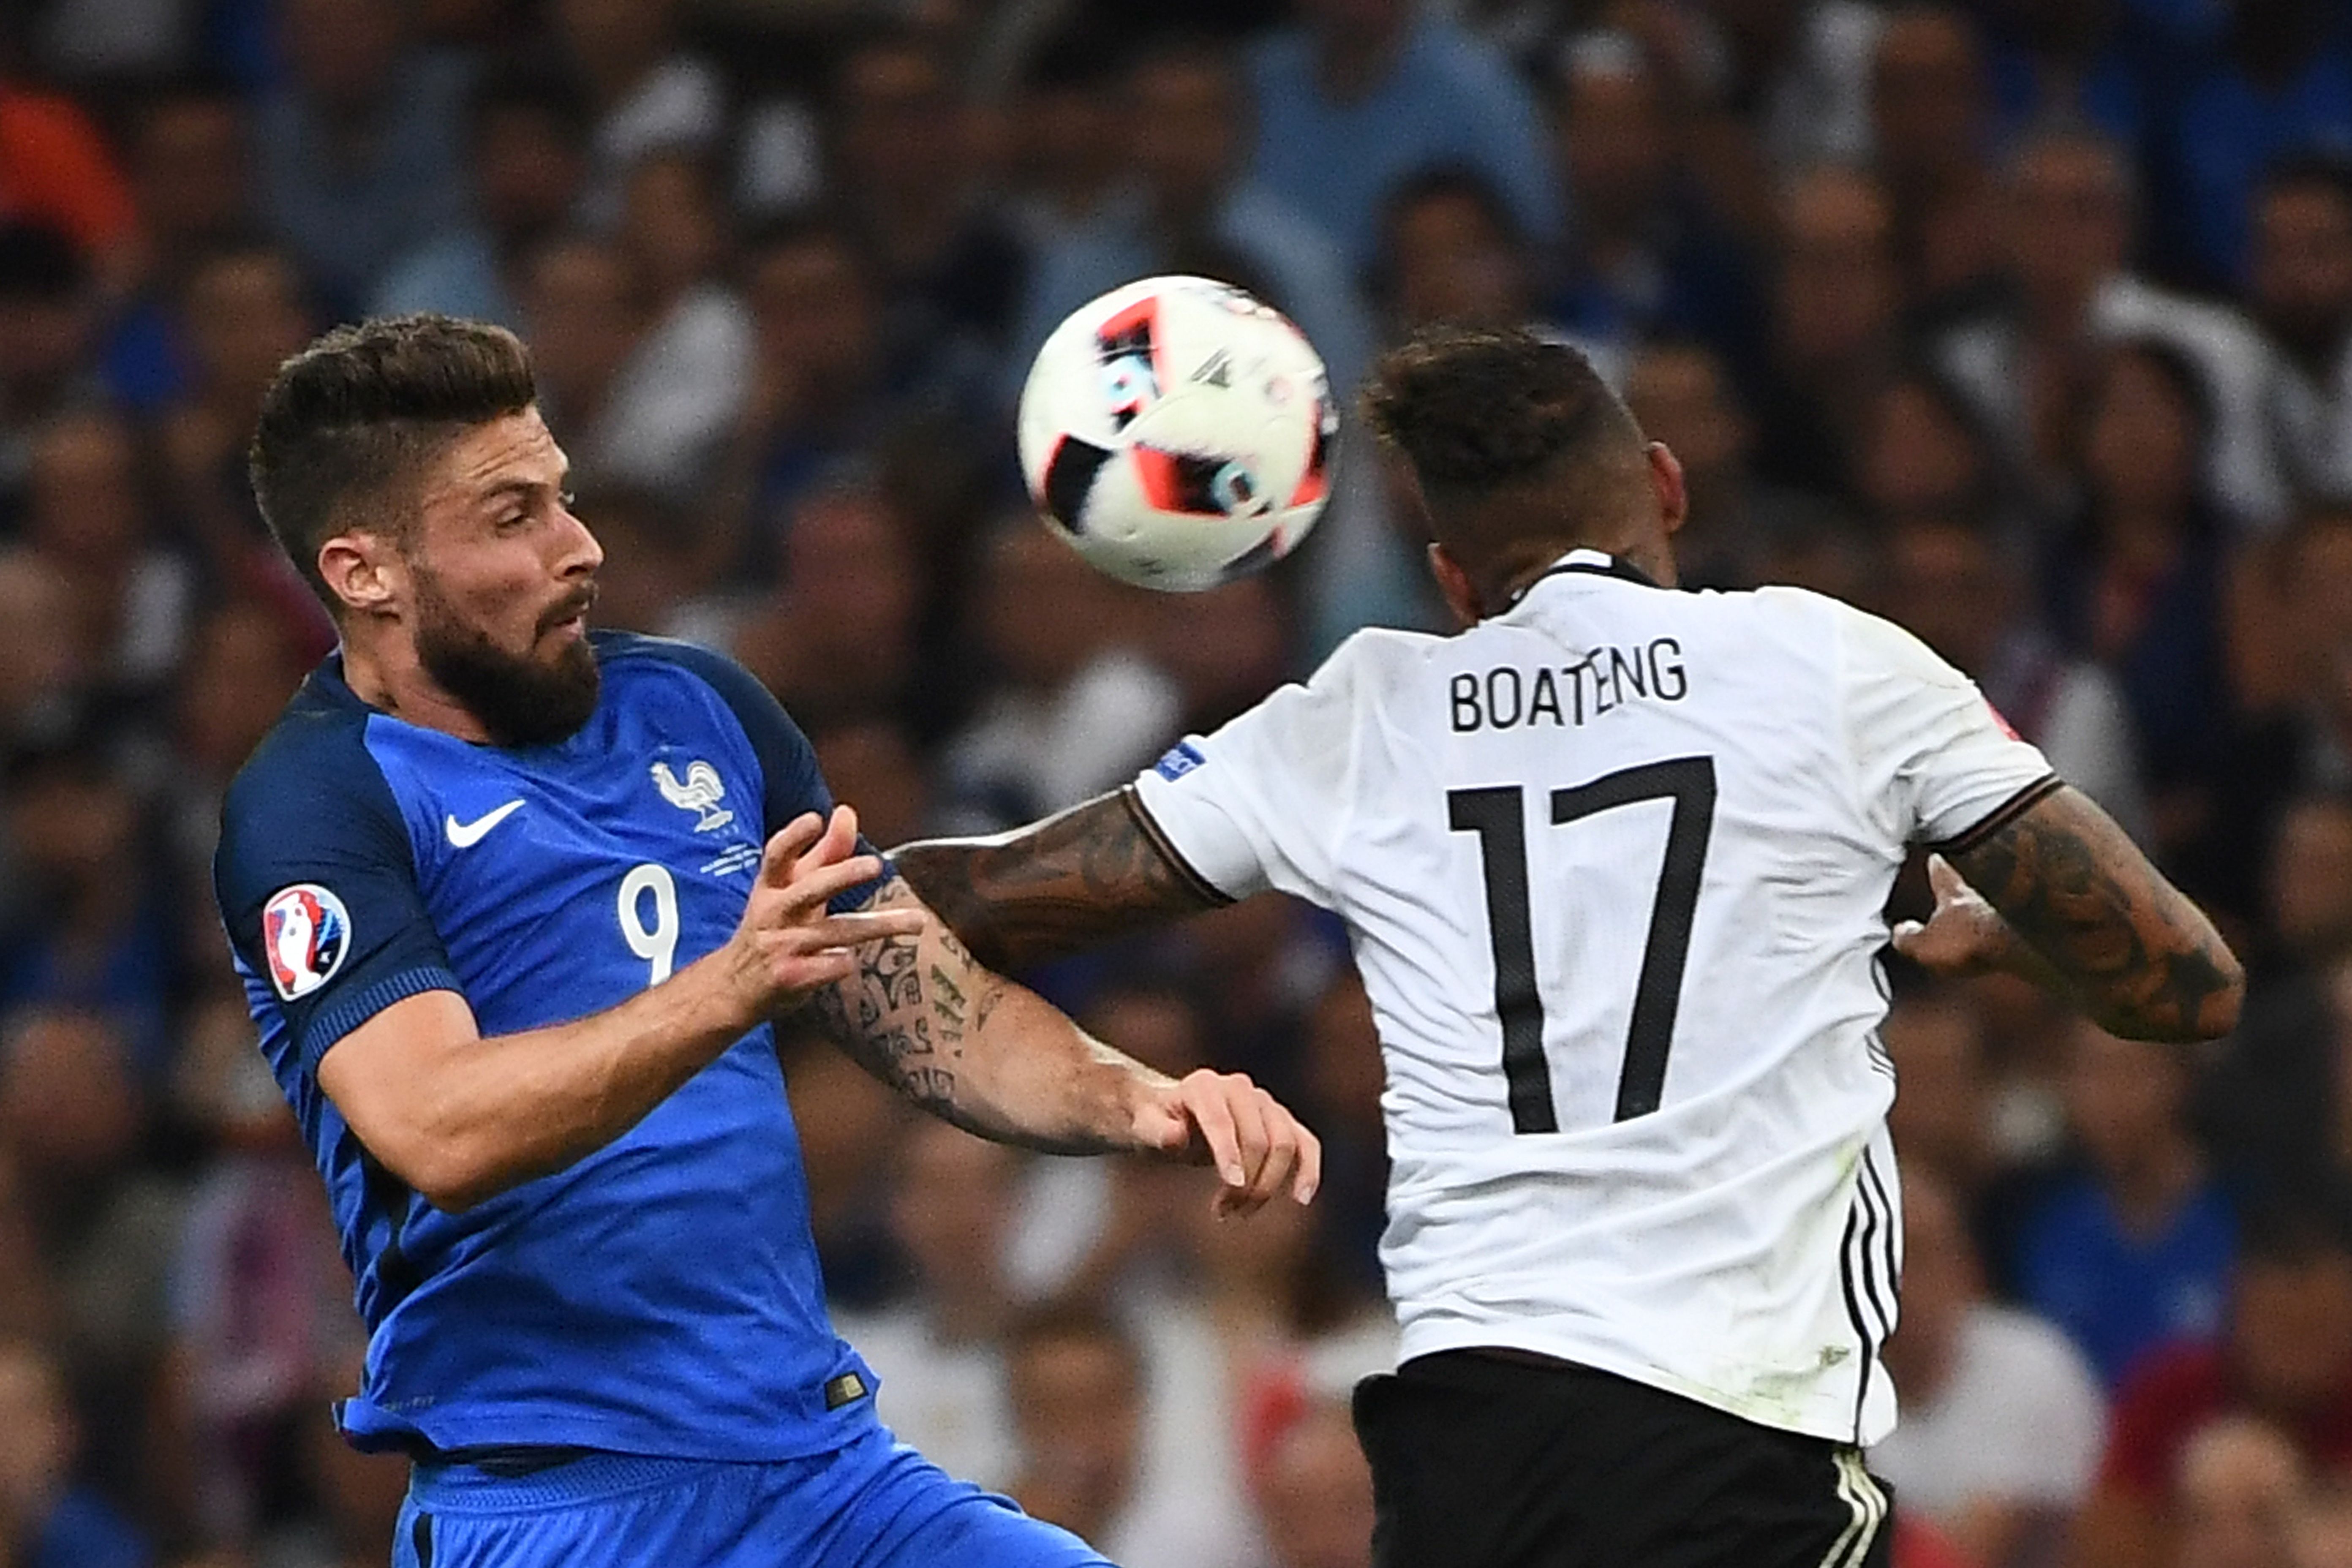 Germany vs. France Highlights: Score & Goals at Euro 2016